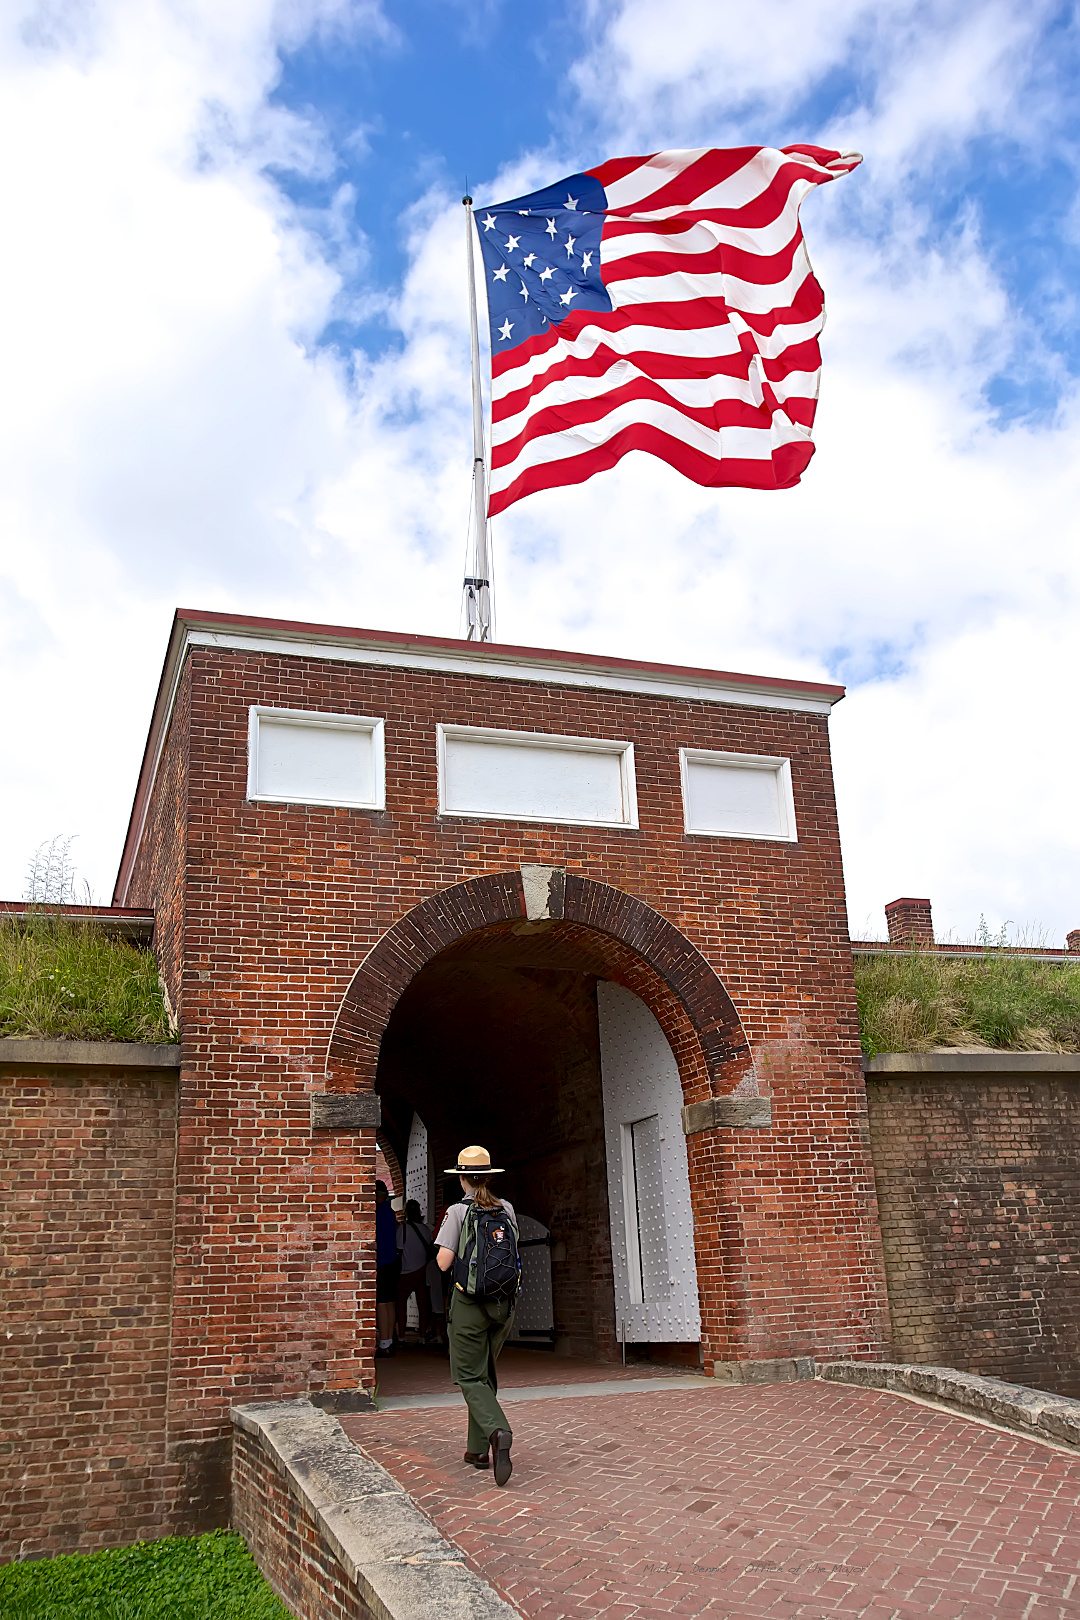 The Star-Spangled Banner flies over Fort McHenry